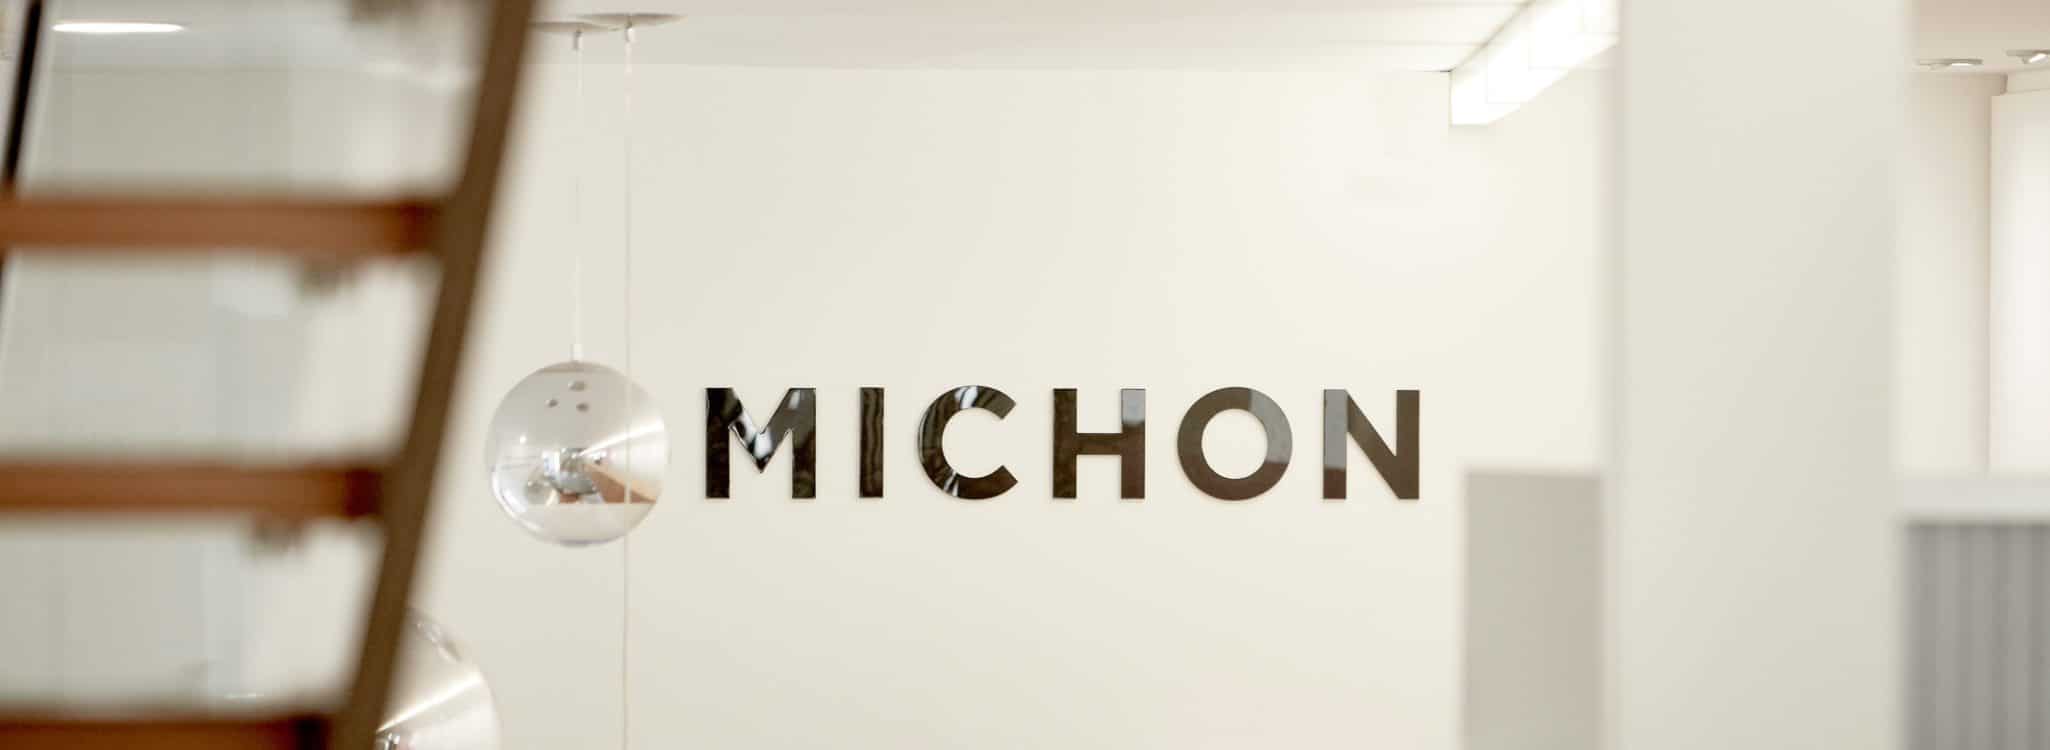 Michon Creative Brand Agency Interior Front Entrance with Michon chrome Michon logo on white wall